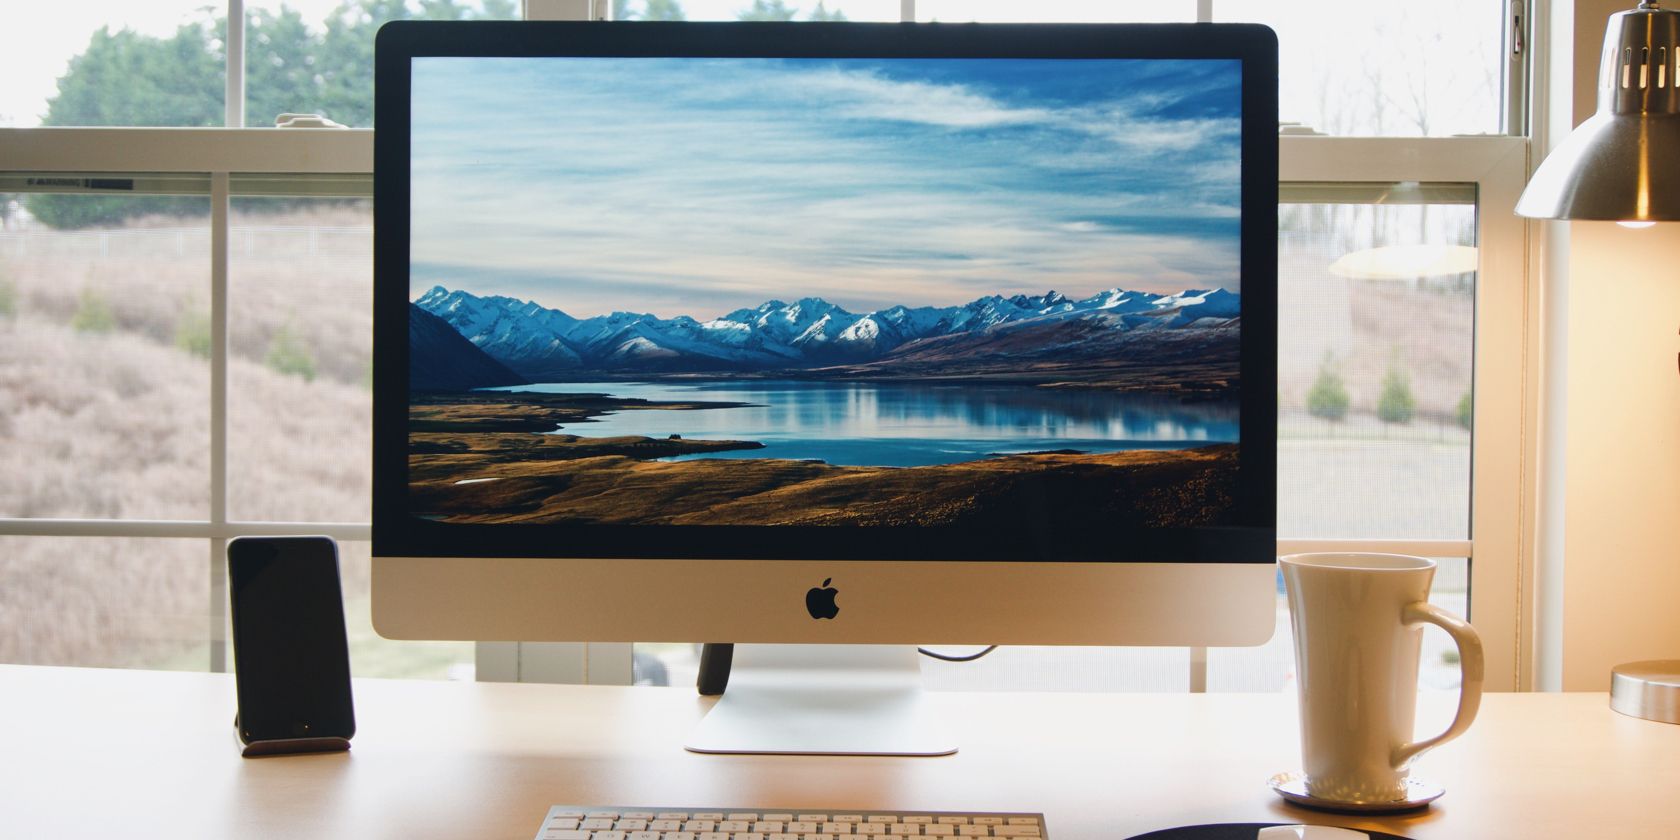 A photograph of an iMac sitting in front of a window framing a picturesque scene